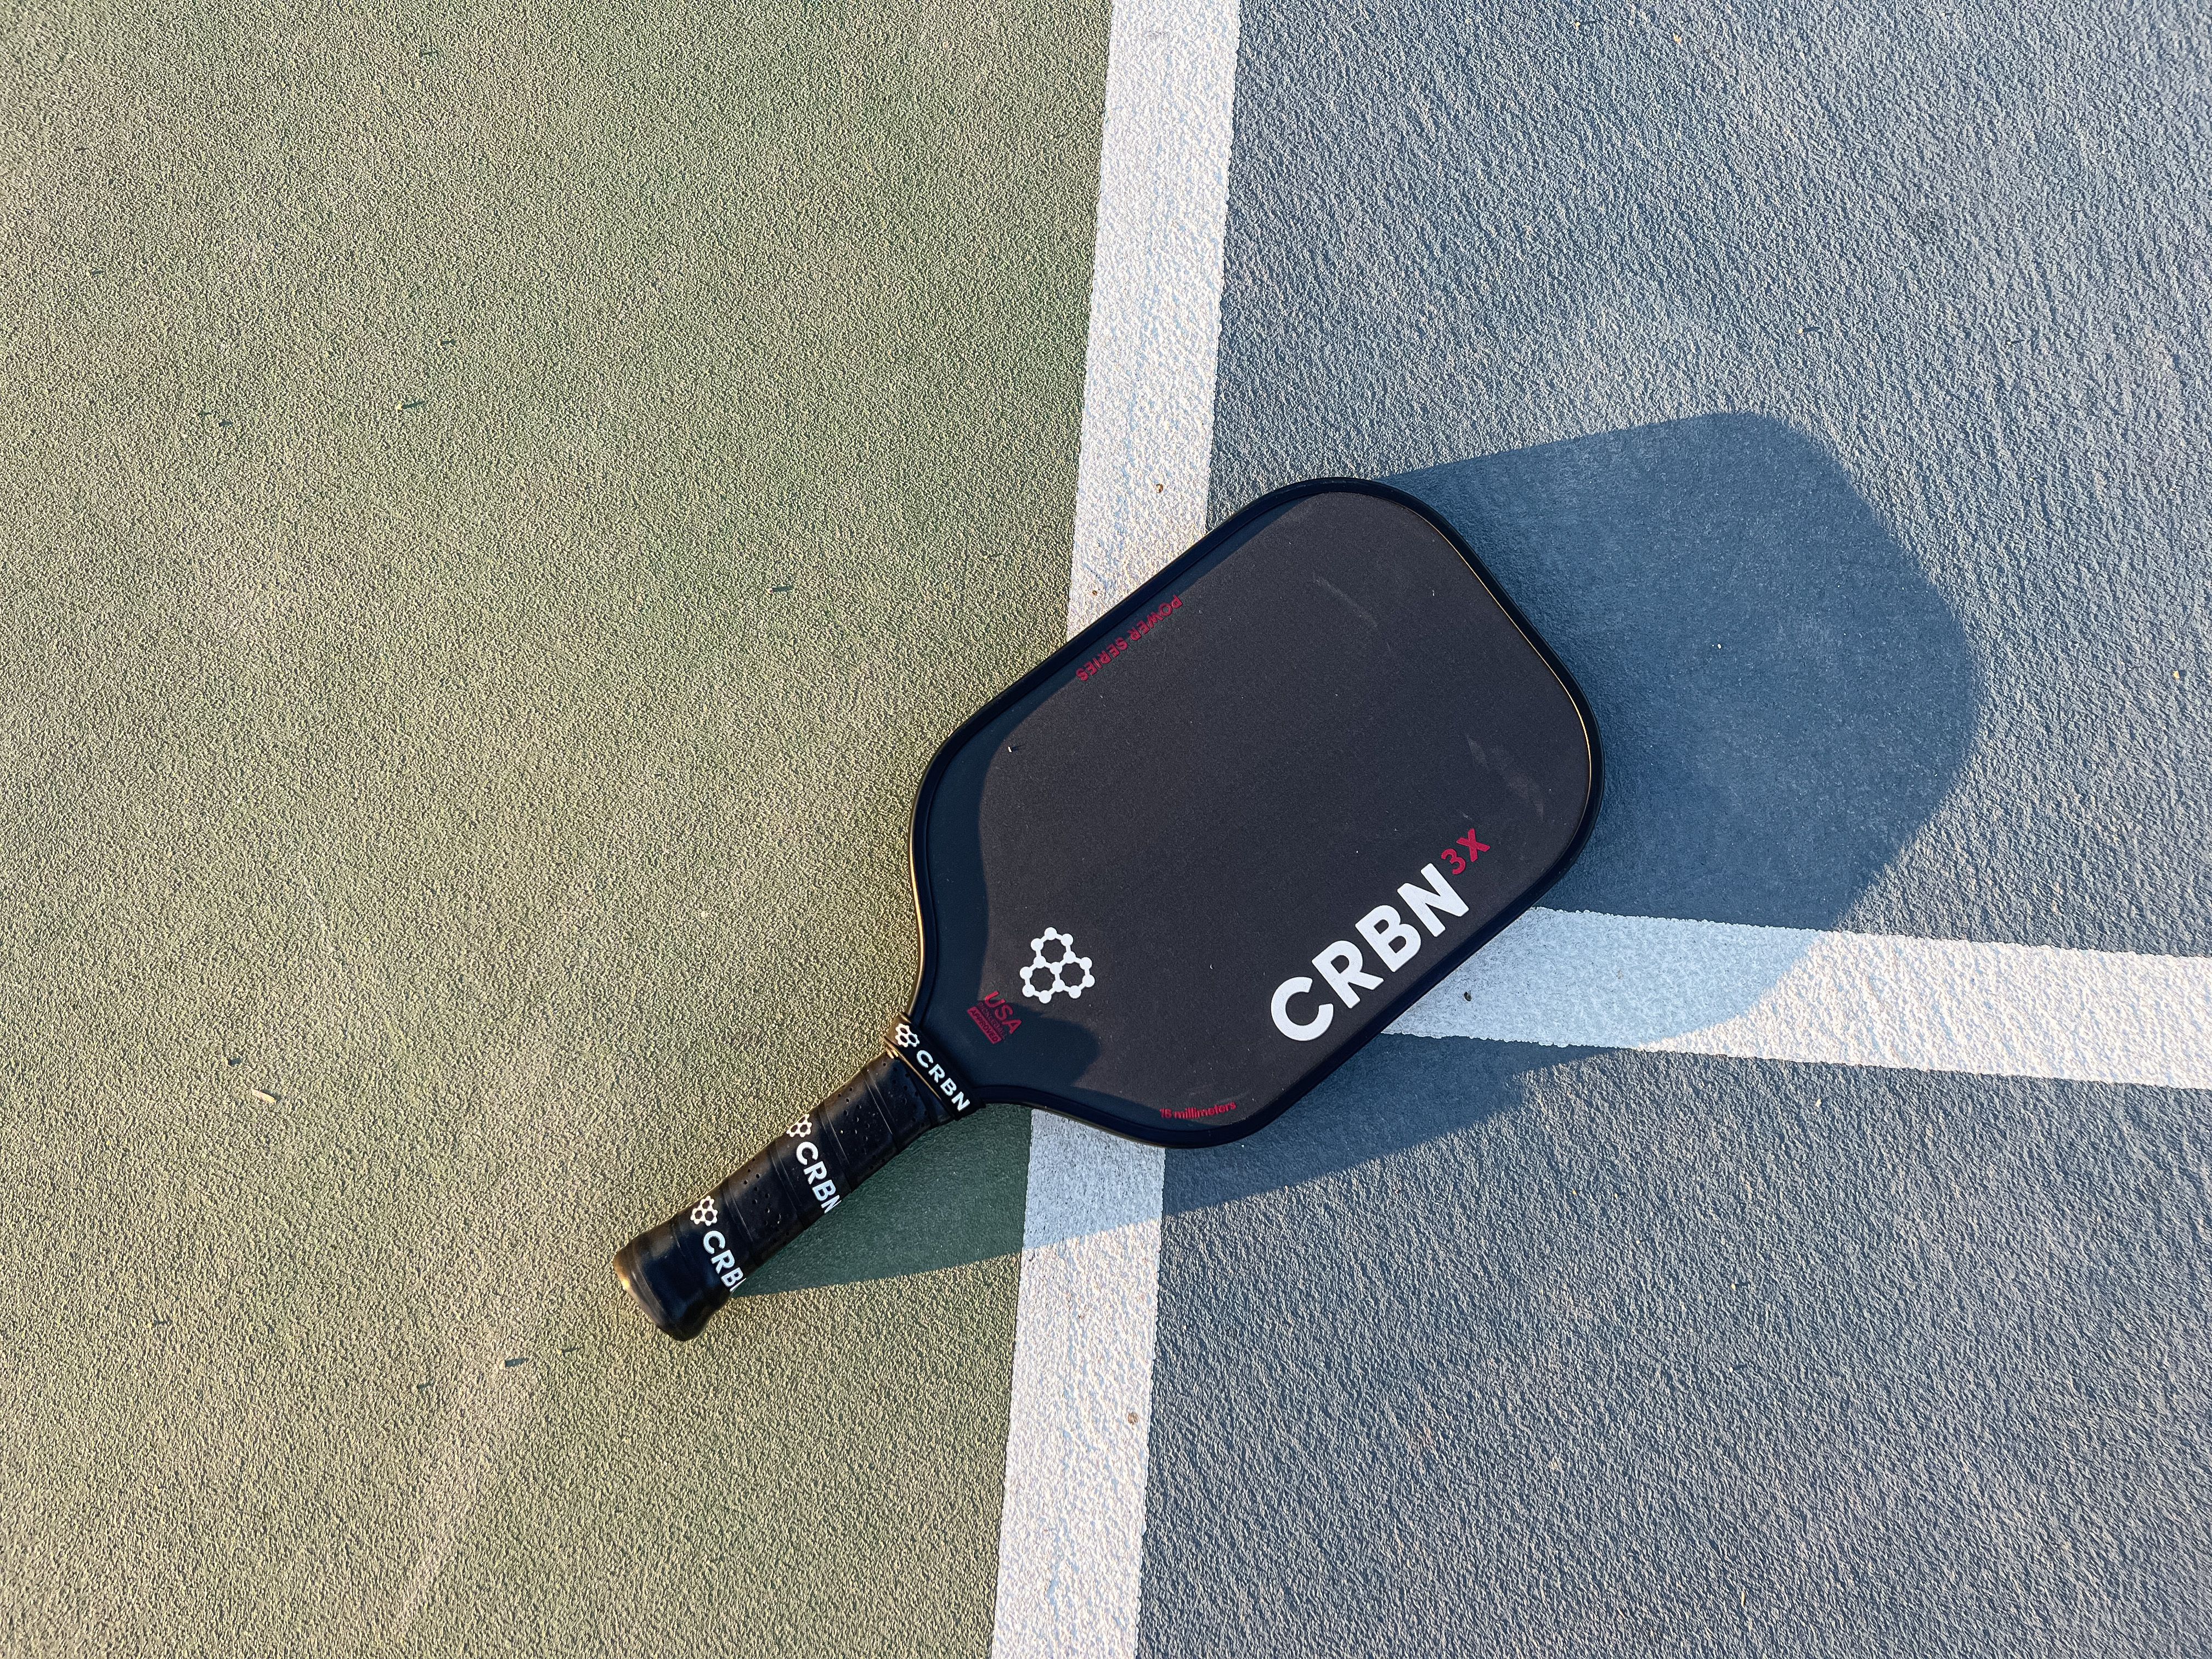 The CRBN-3X Power Series paddle resting on a pickleball court